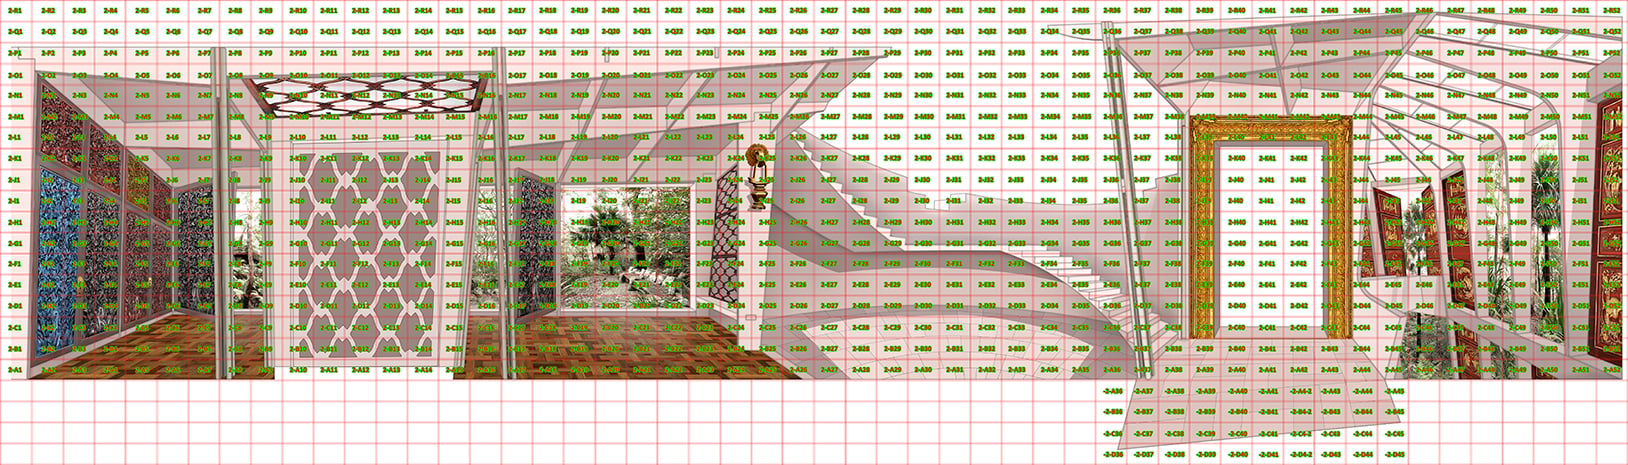 Elevation-2_Grid-with-Image-stretch